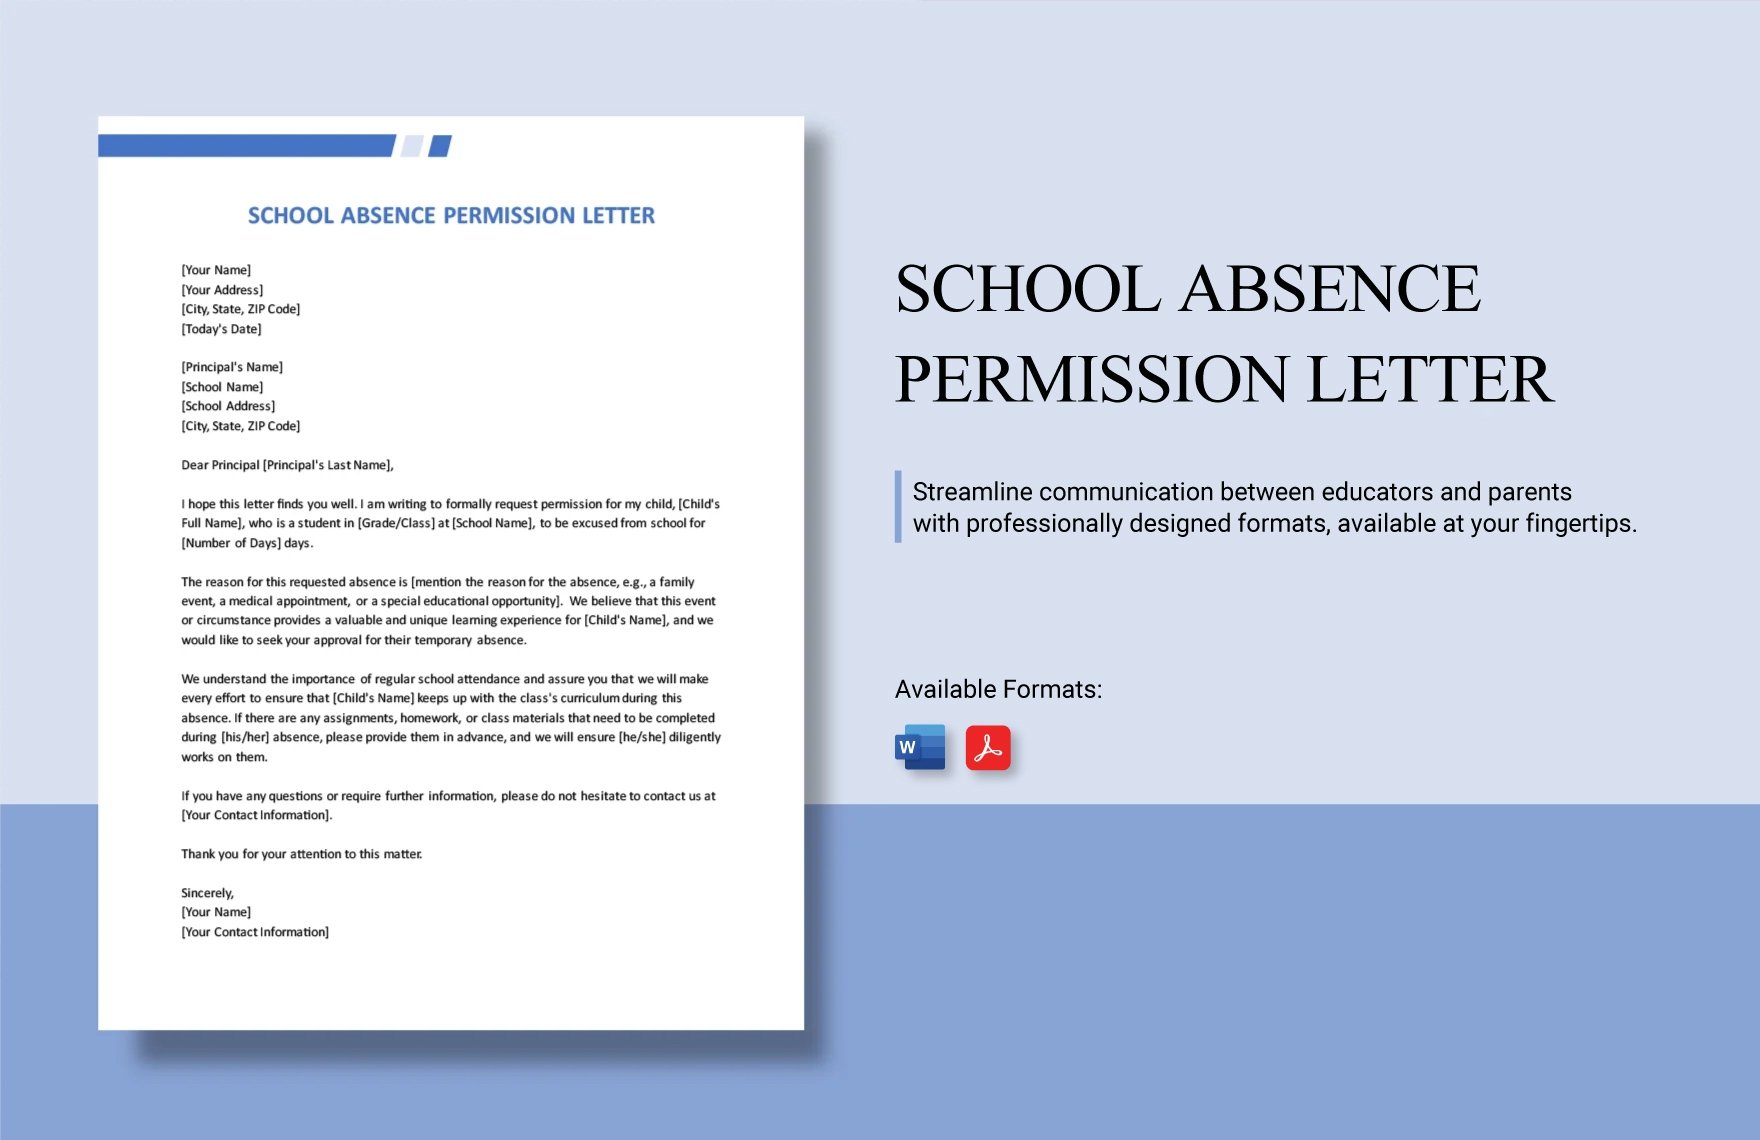 School Absence Permission Letter in Word, PDF